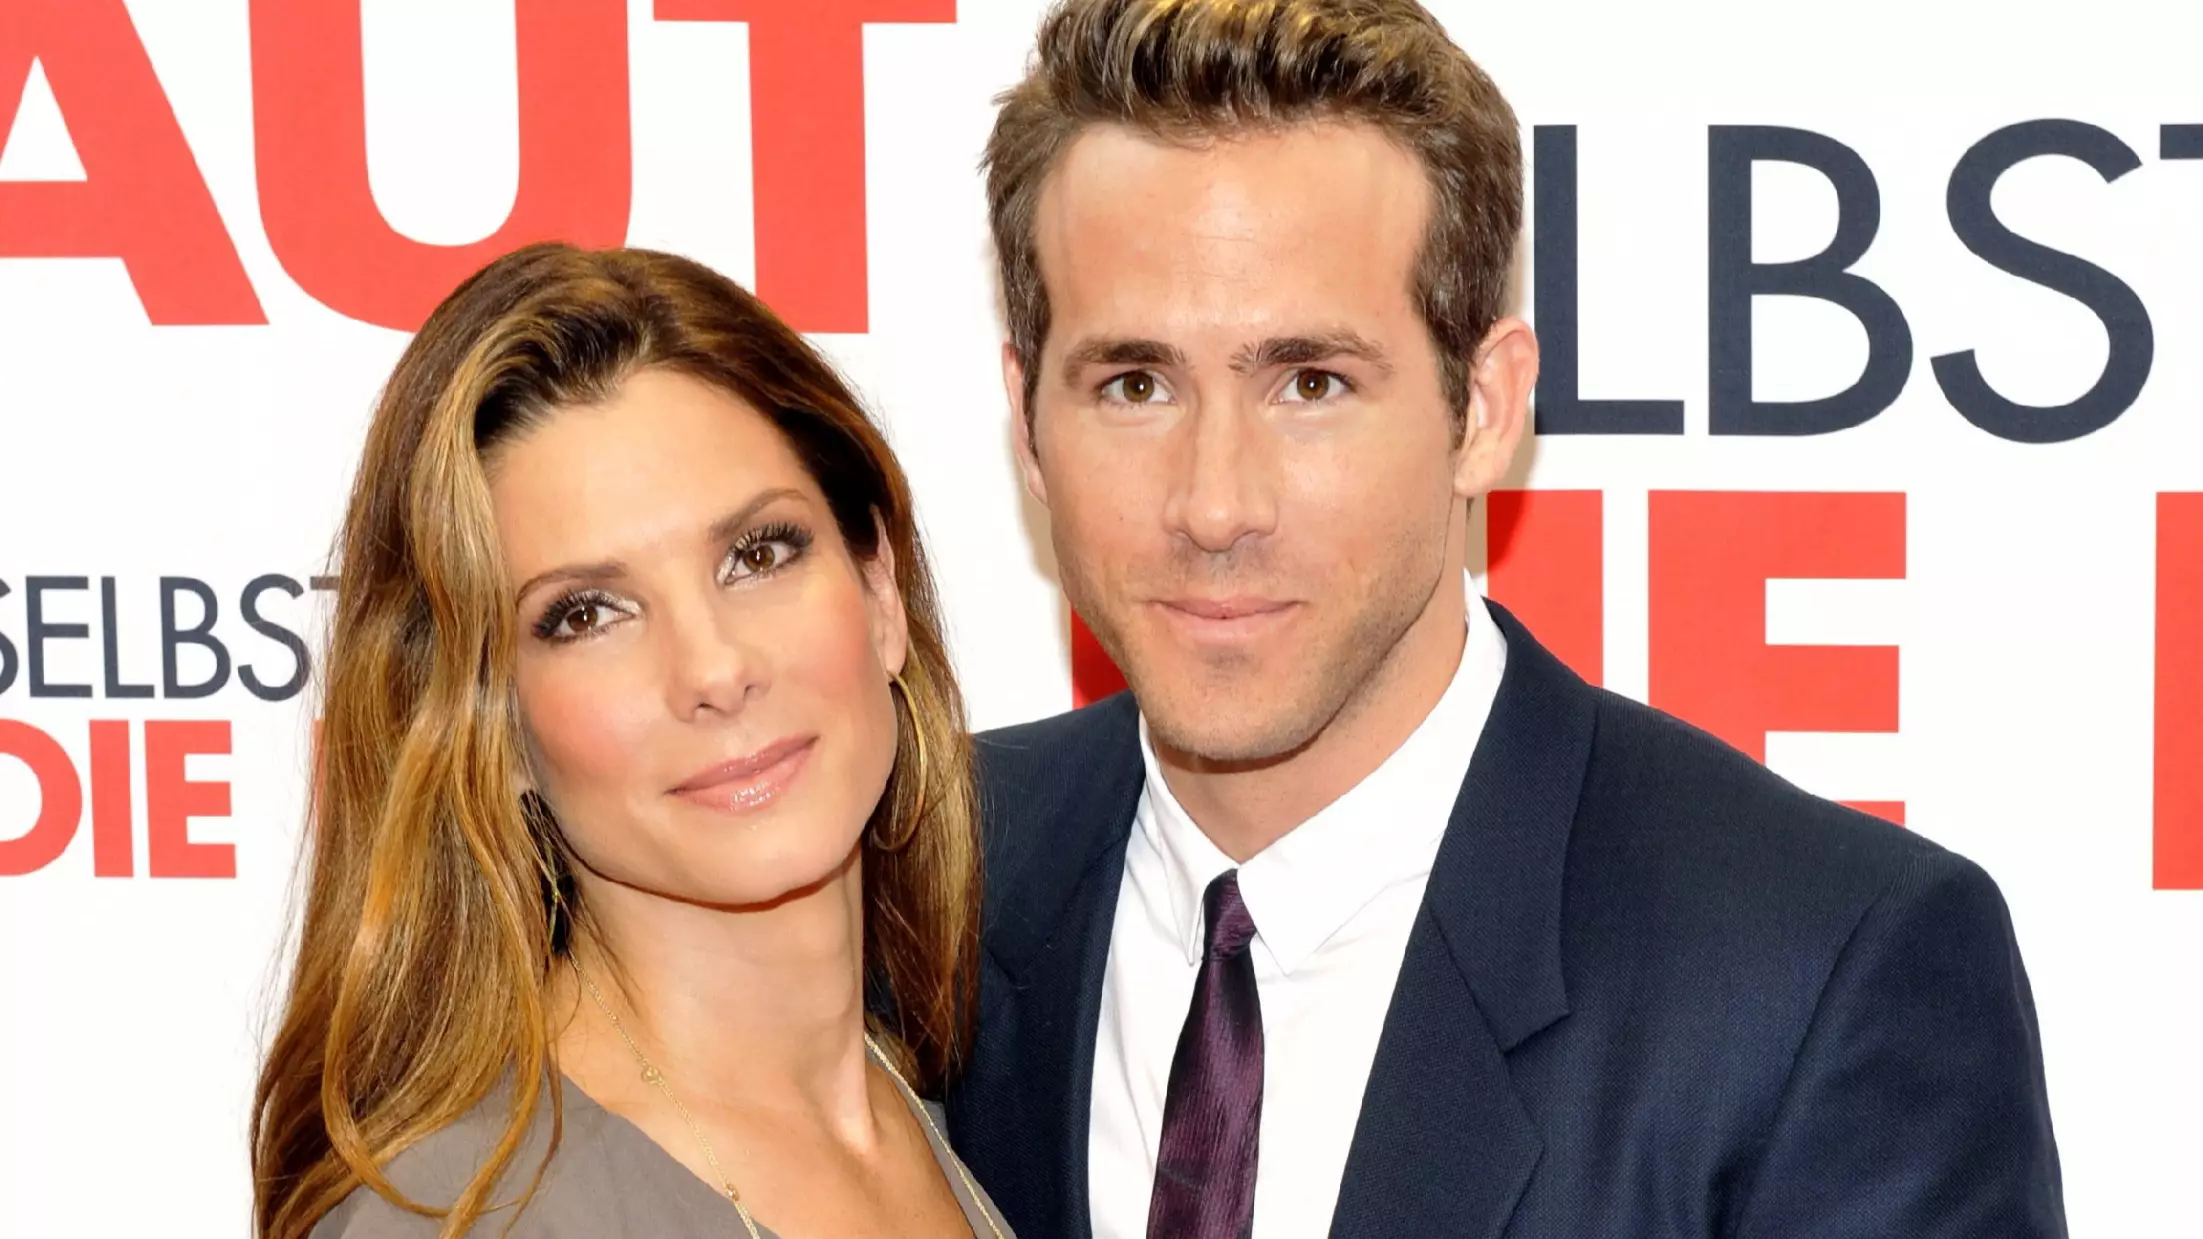 The Proposal Stars Sandra Bullock And Ryan Reynolds Could Be Starring Together Once Again